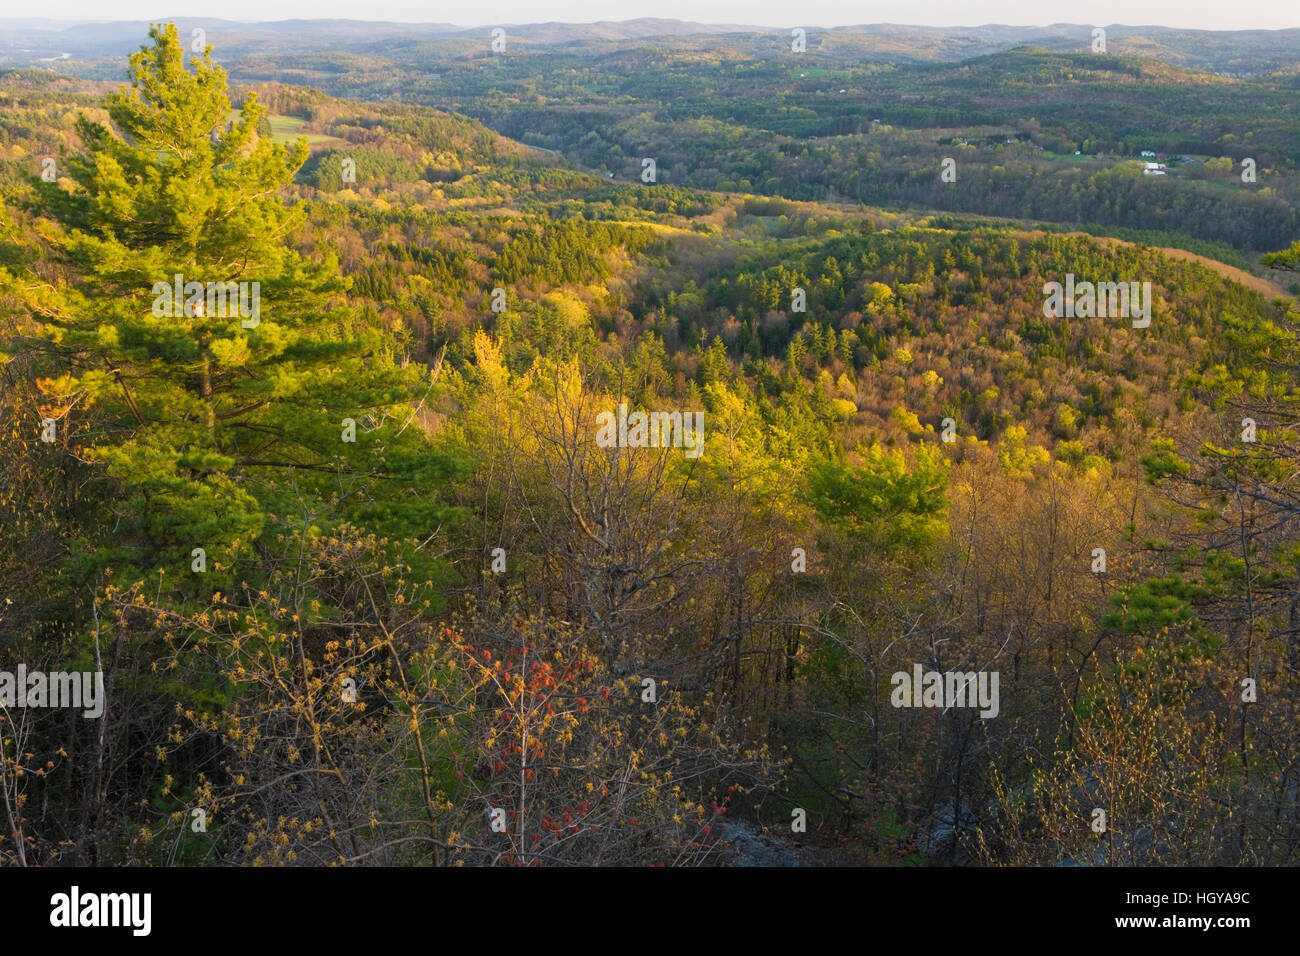 The view south from Black Mountain in Dummerston, Vermont. Stock Photo